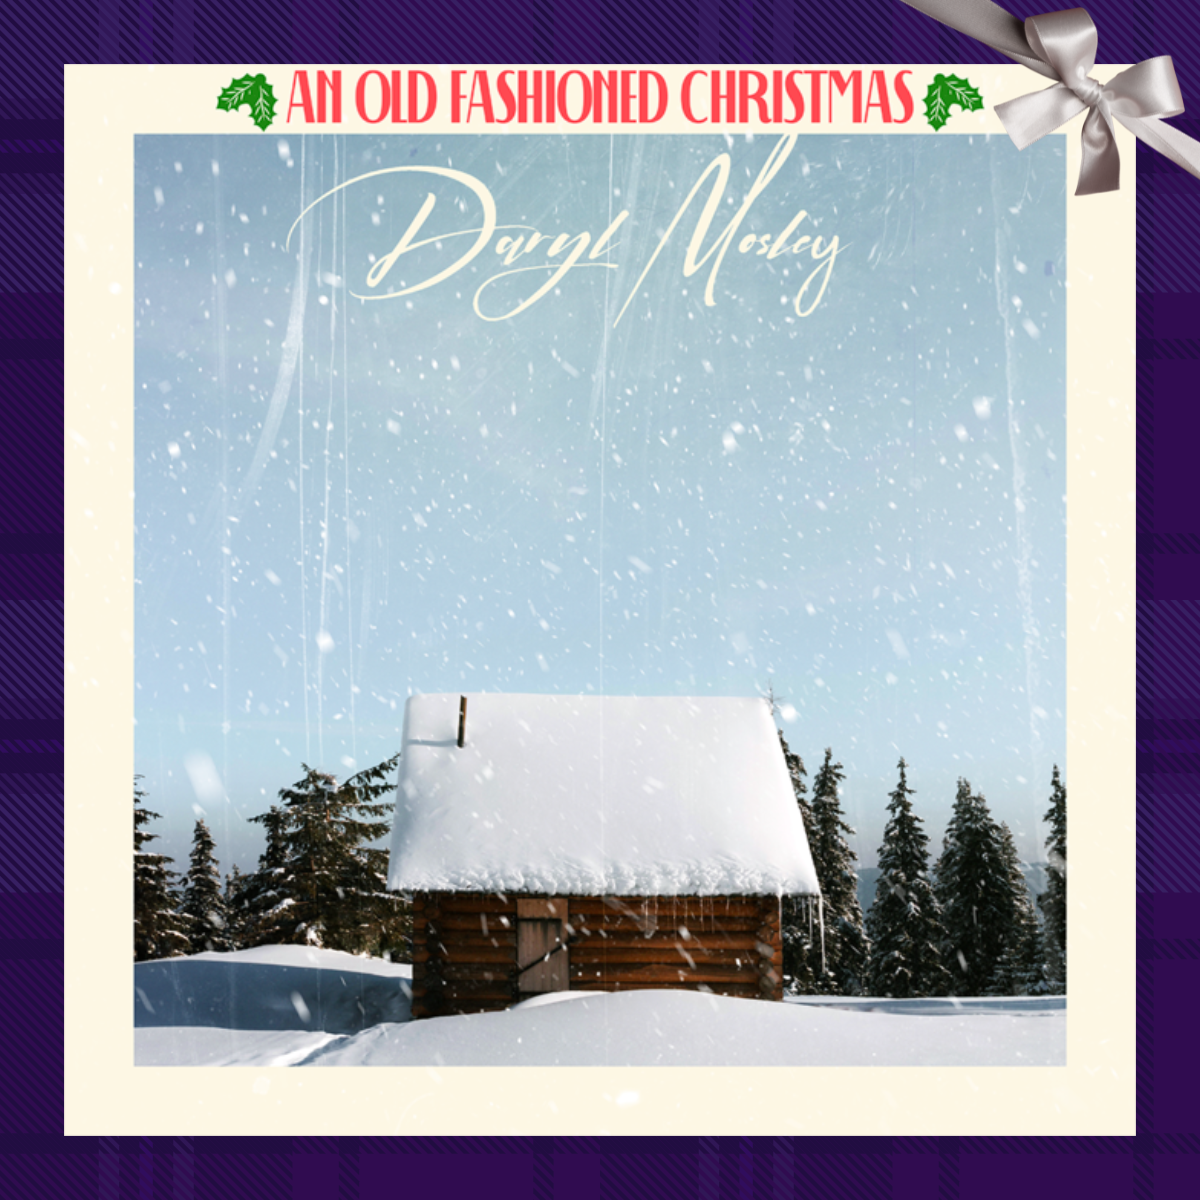 BGS WRAPS: Wade Bowen, “All I Want for Christmas Is You”